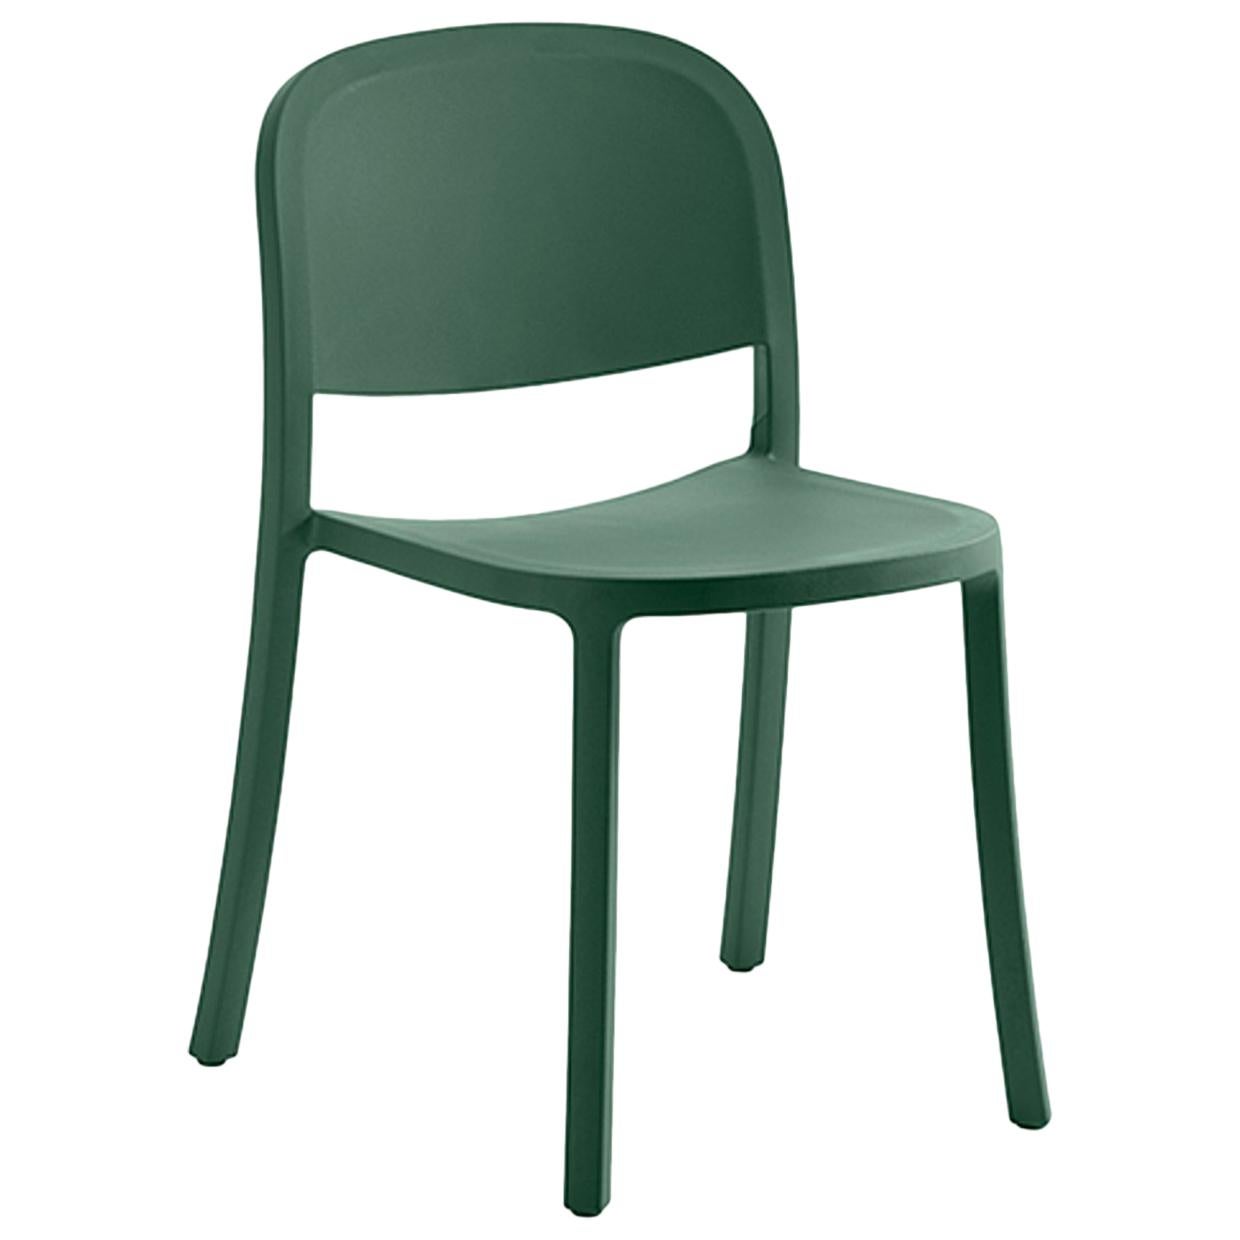 Emeco 1 Inch Reclaimed Chair in Green by Jasper Morrison For Sale